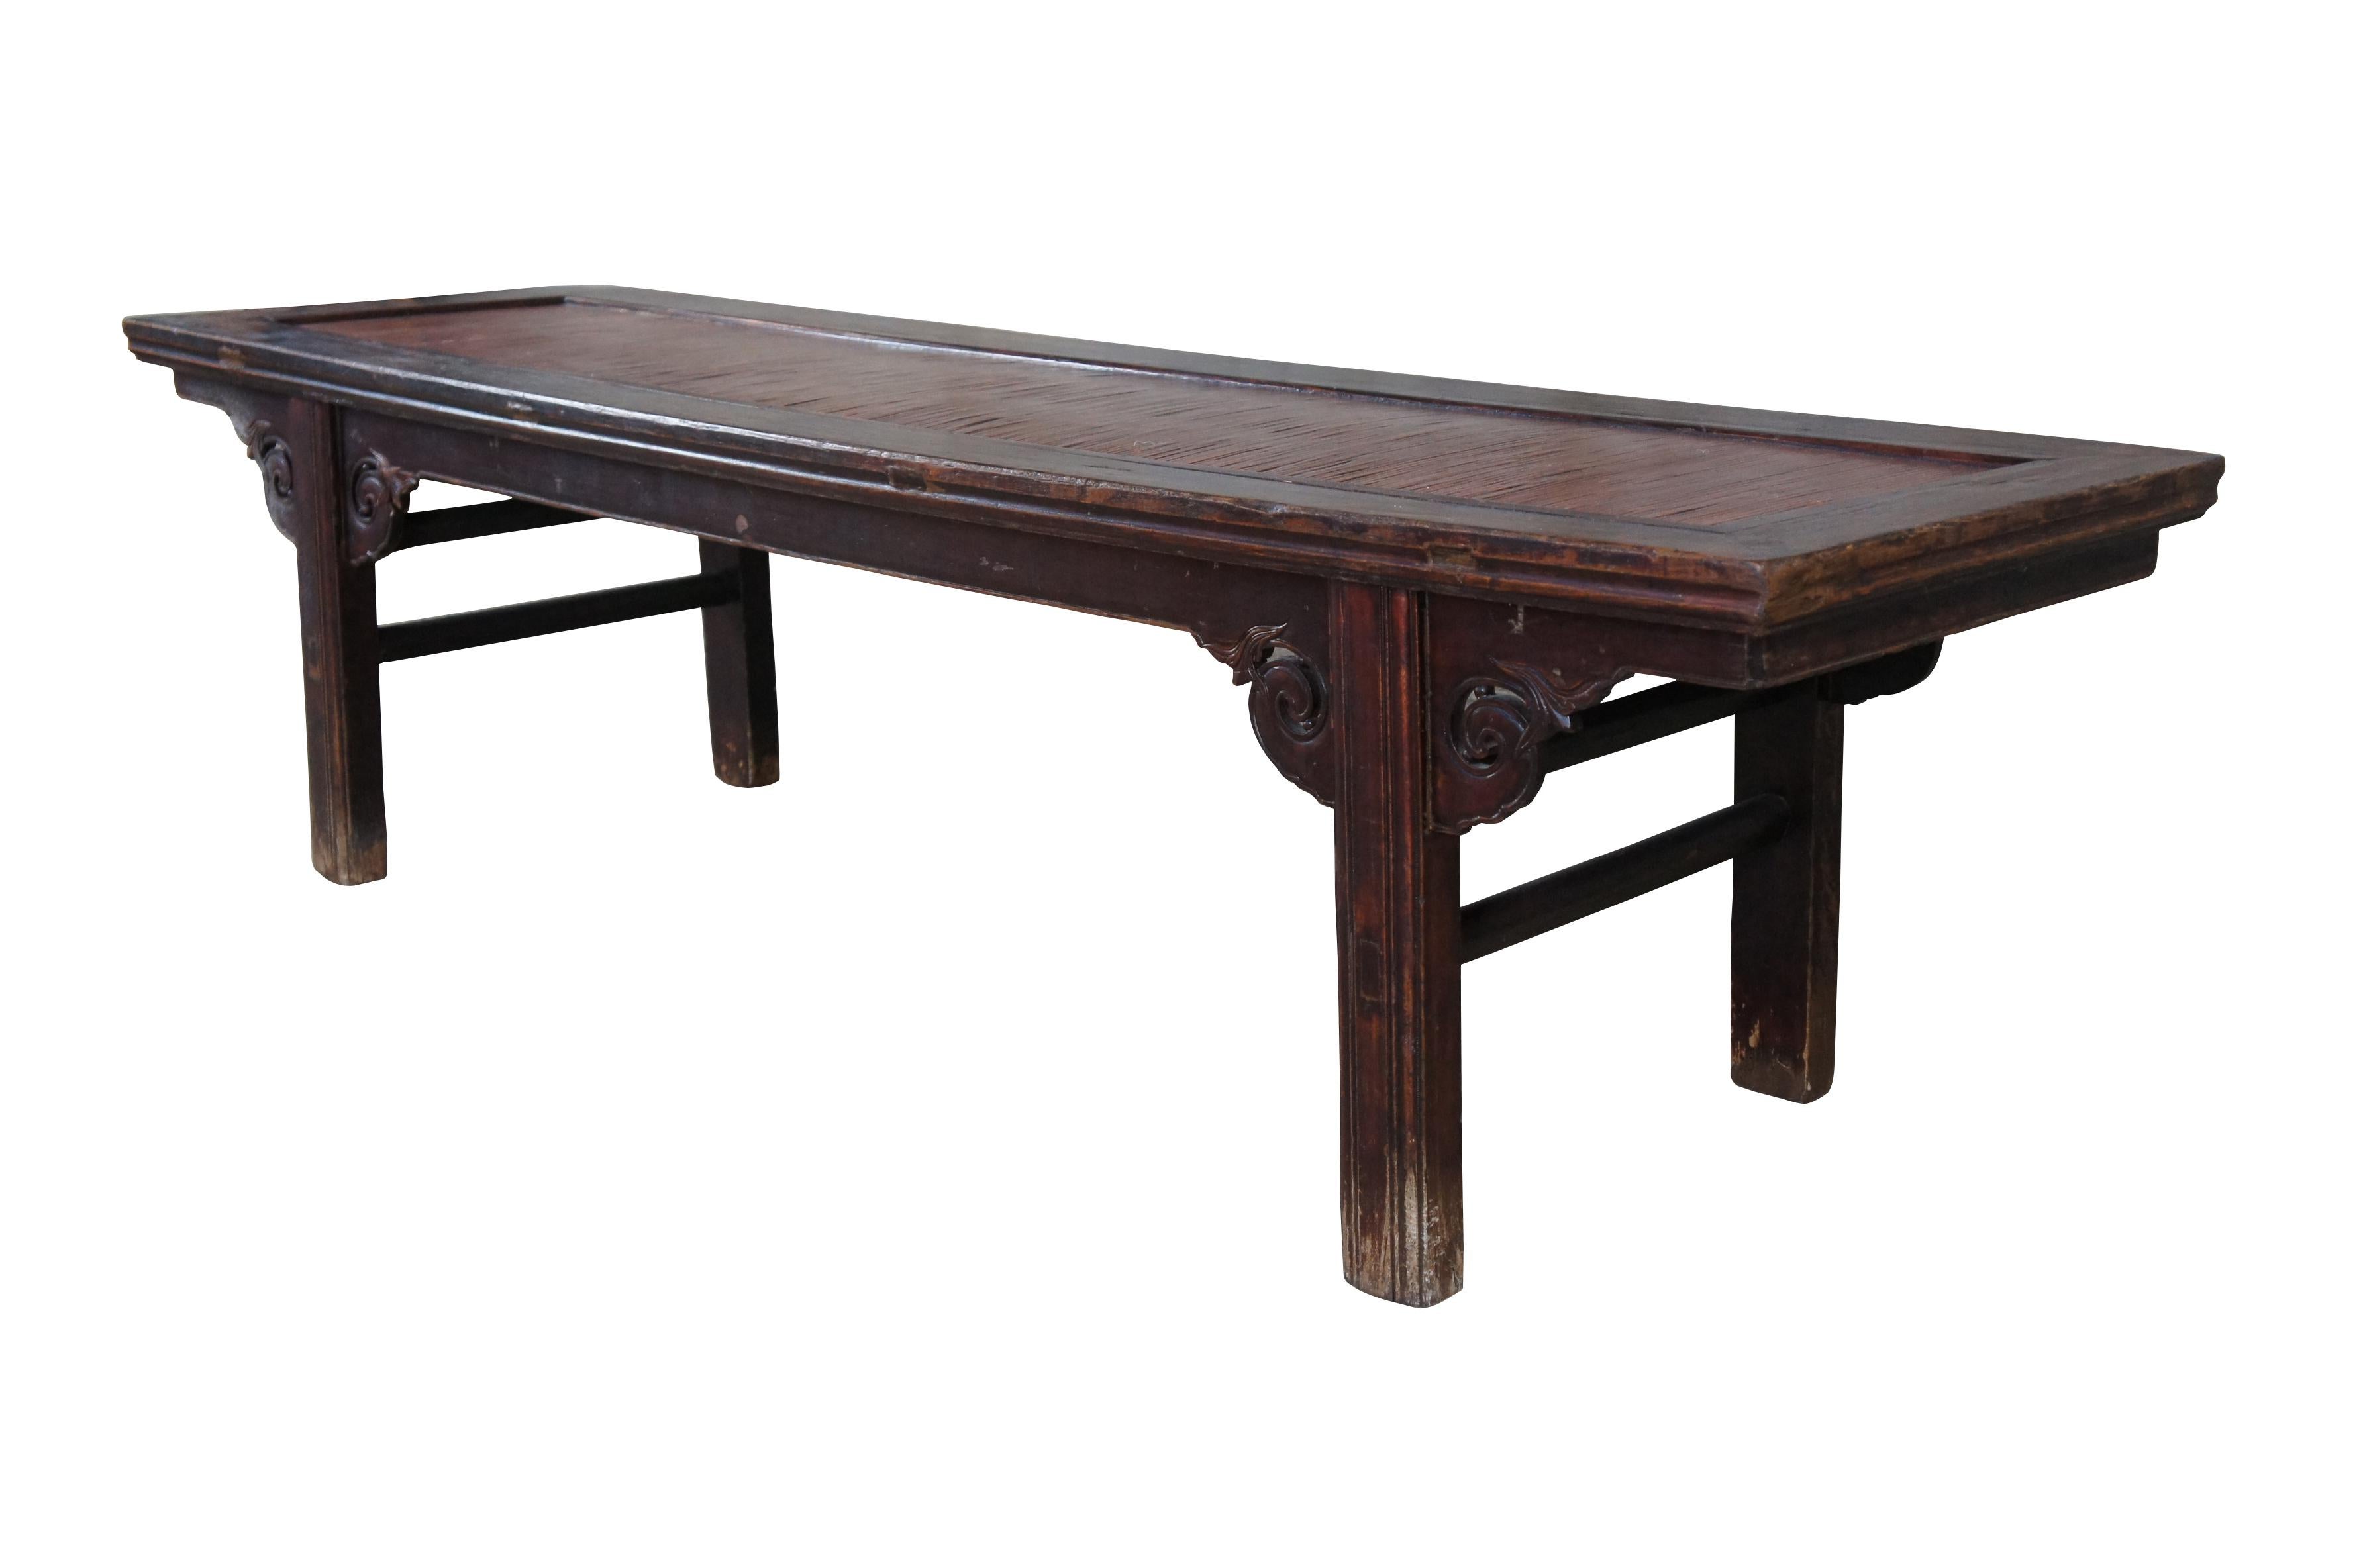 Charming late 19th century Chinese Qing Dynasty bench. Made from solid elm wood in mortise and tenon construction with an inset split reed top. Features cared and scrolled spandrals with foliate detail. Supported by straight legs connected by double